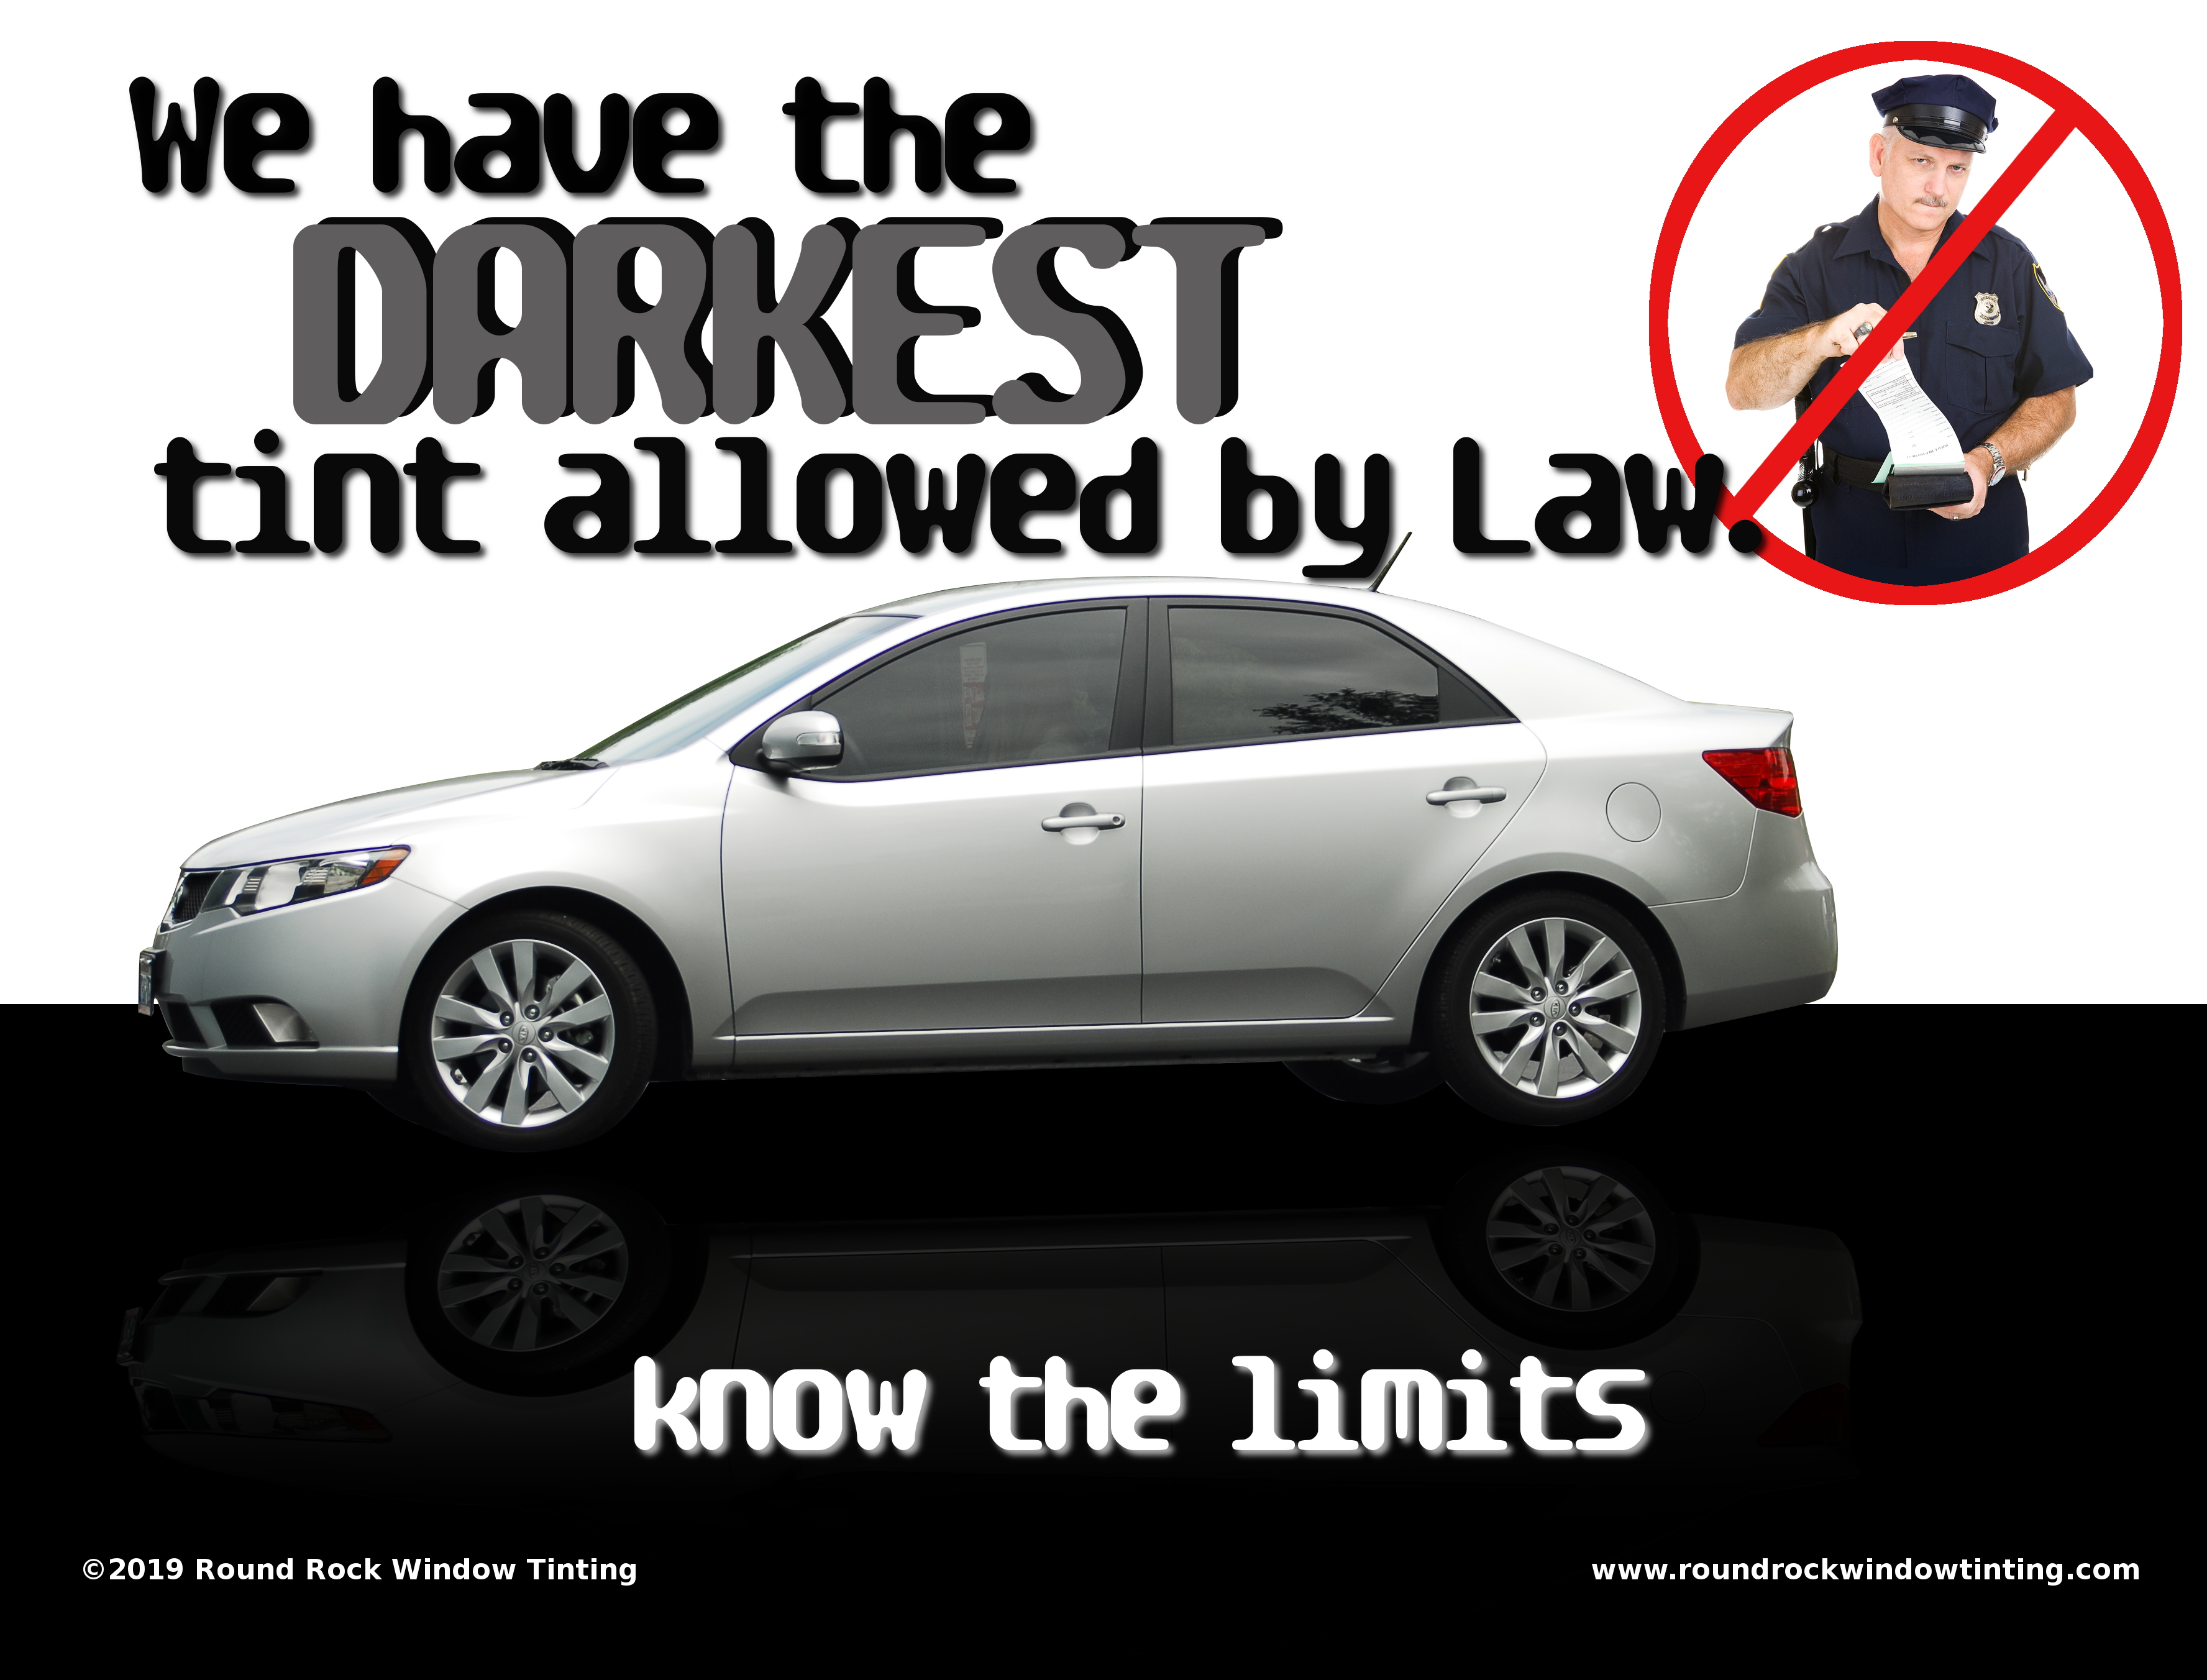 We have the darkest legal window tint in Texas